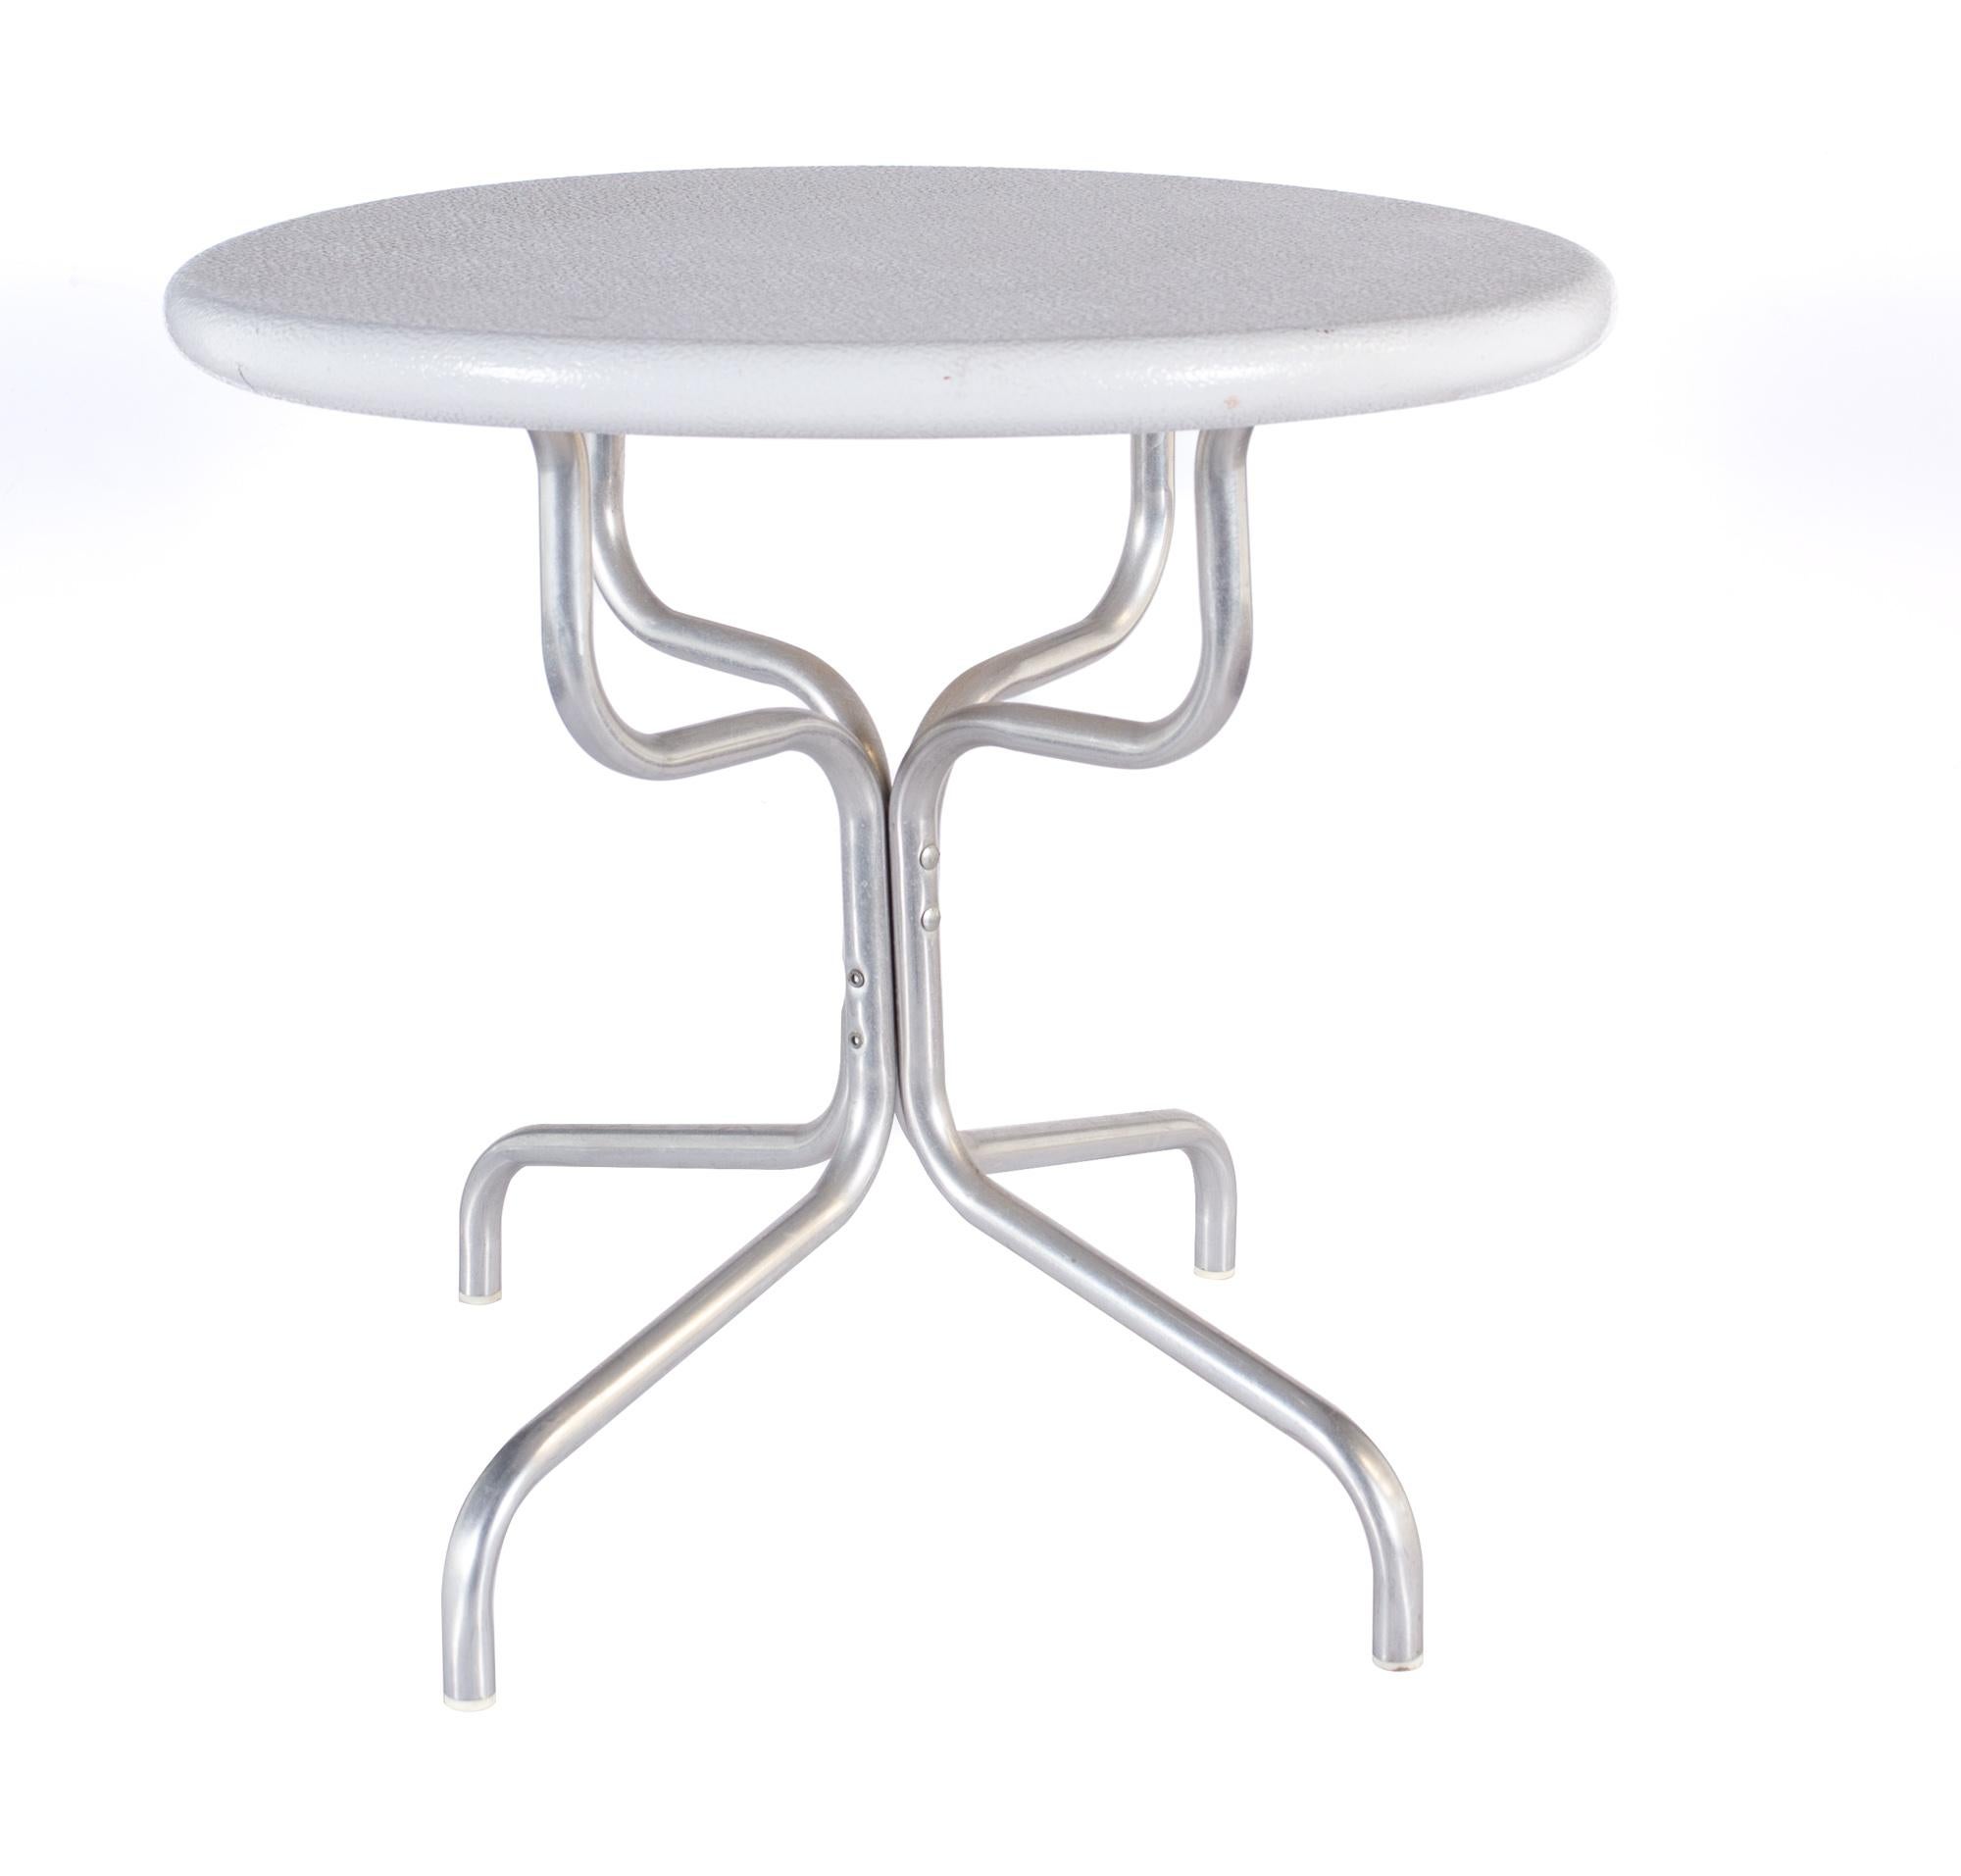 Mid-century aluminum white painted side table

The table measures: 22 wide x 22 deep x 20 inches high, with a chair clearance of 18.8 inches

All pieces of furniture can be had in what we call restored vintage condition. That means the piece is